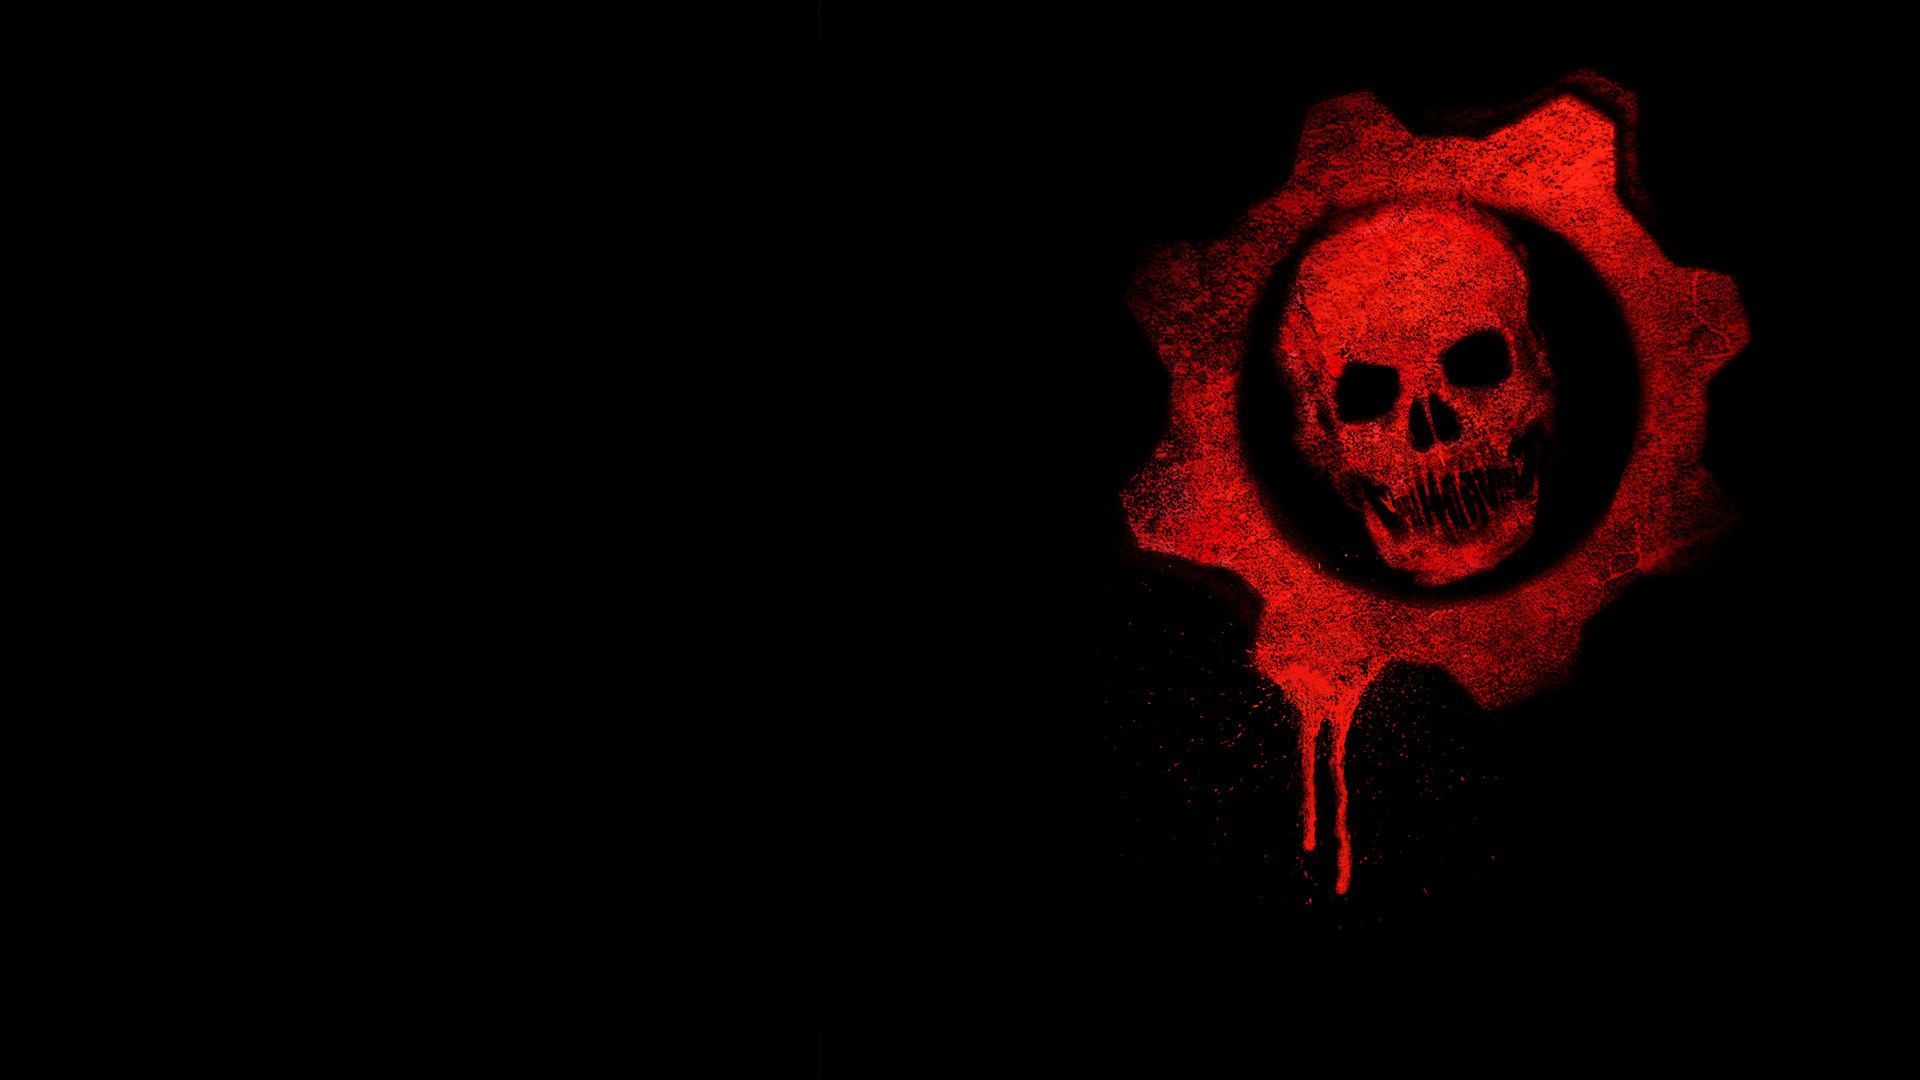 Free download Logo game Gears of War background wallpaper and image [1920x1080] for your Desktop, Mobile & Tablet. Explore Gears Of War Background. Gears Of War 3 Wallpaper, Gears